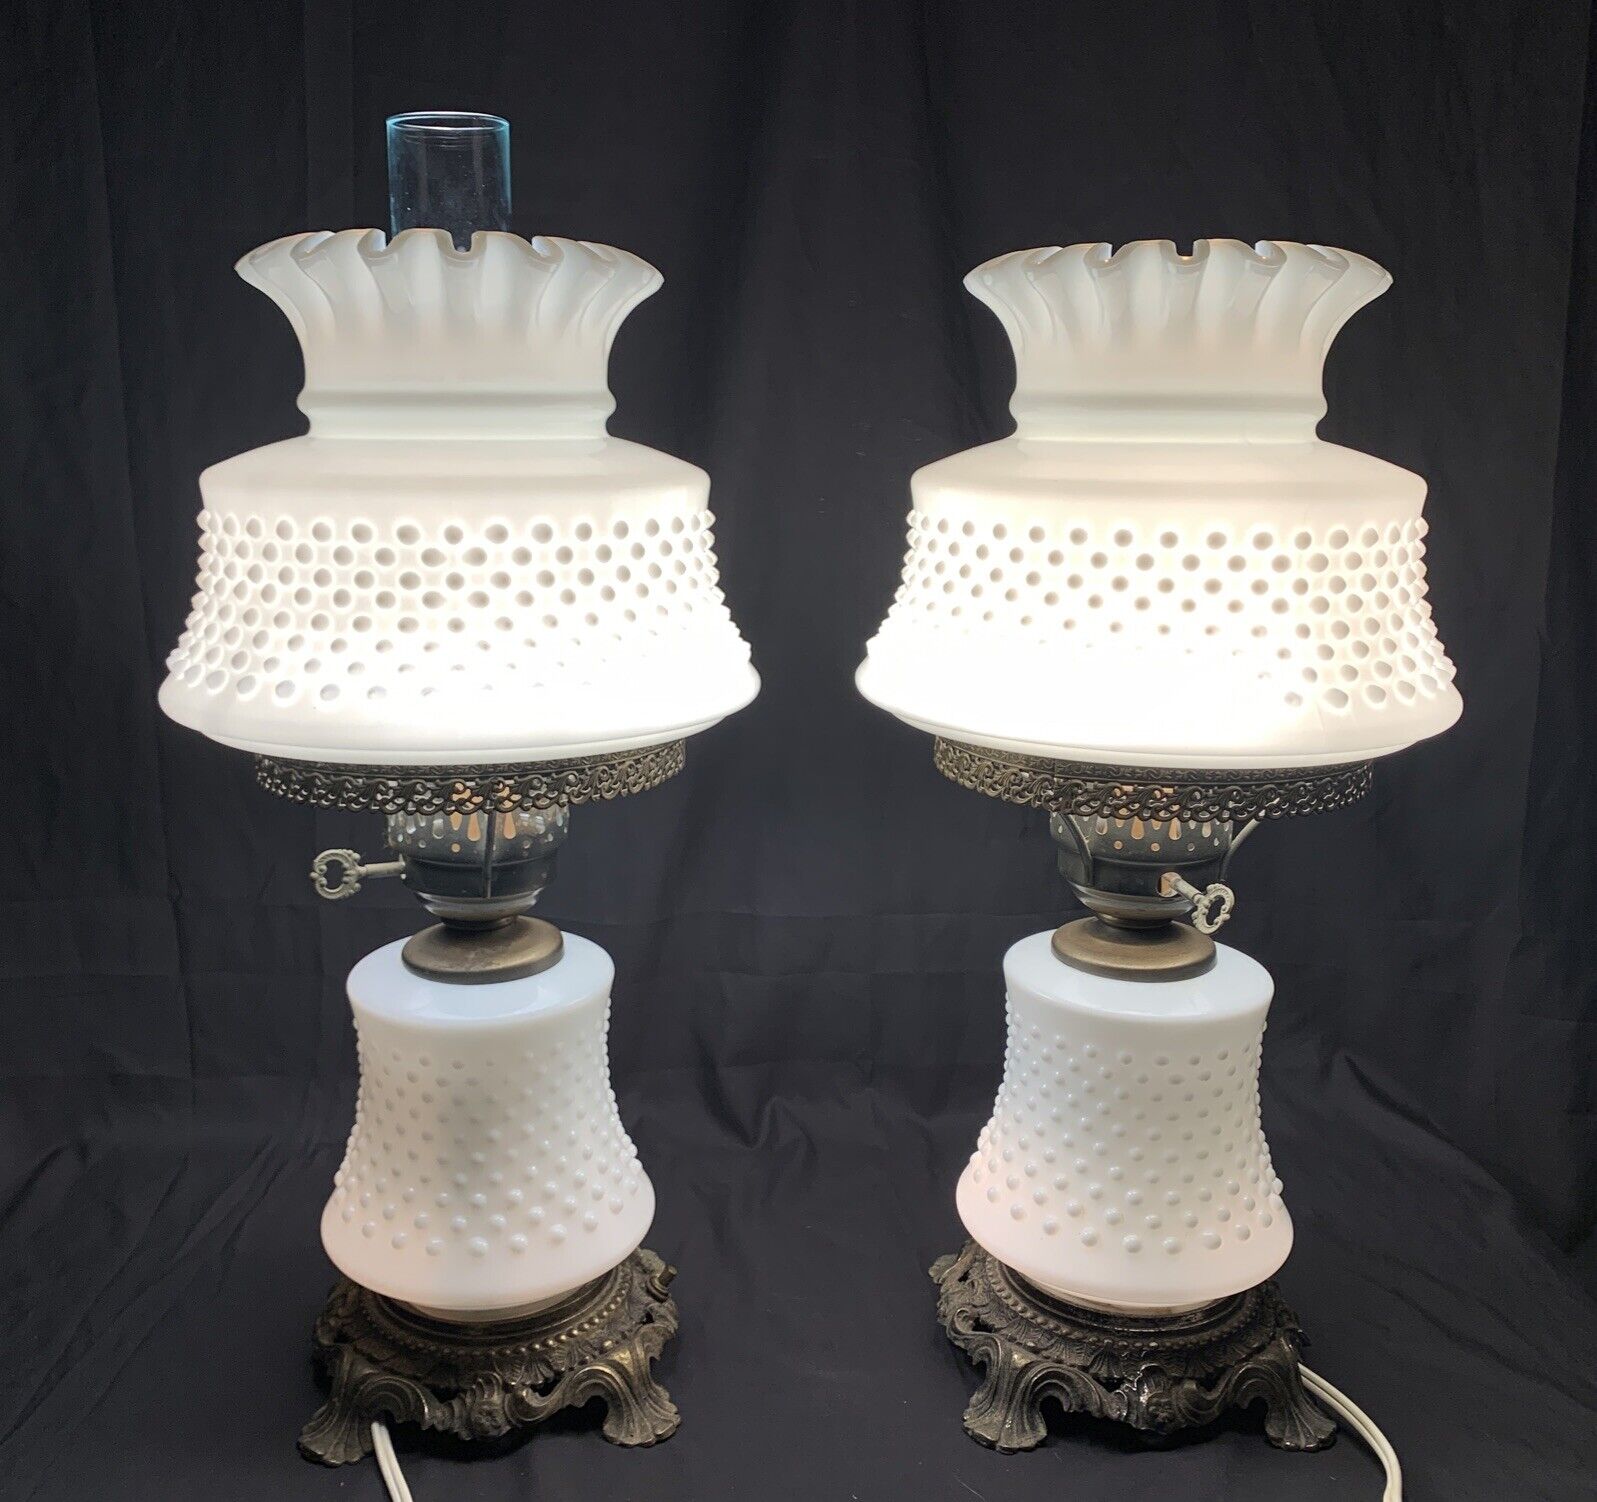 ✨(2) Hobnail Milk Glass Hurricane Parlor Lamp Gone With The Wind Brass Lamp✨